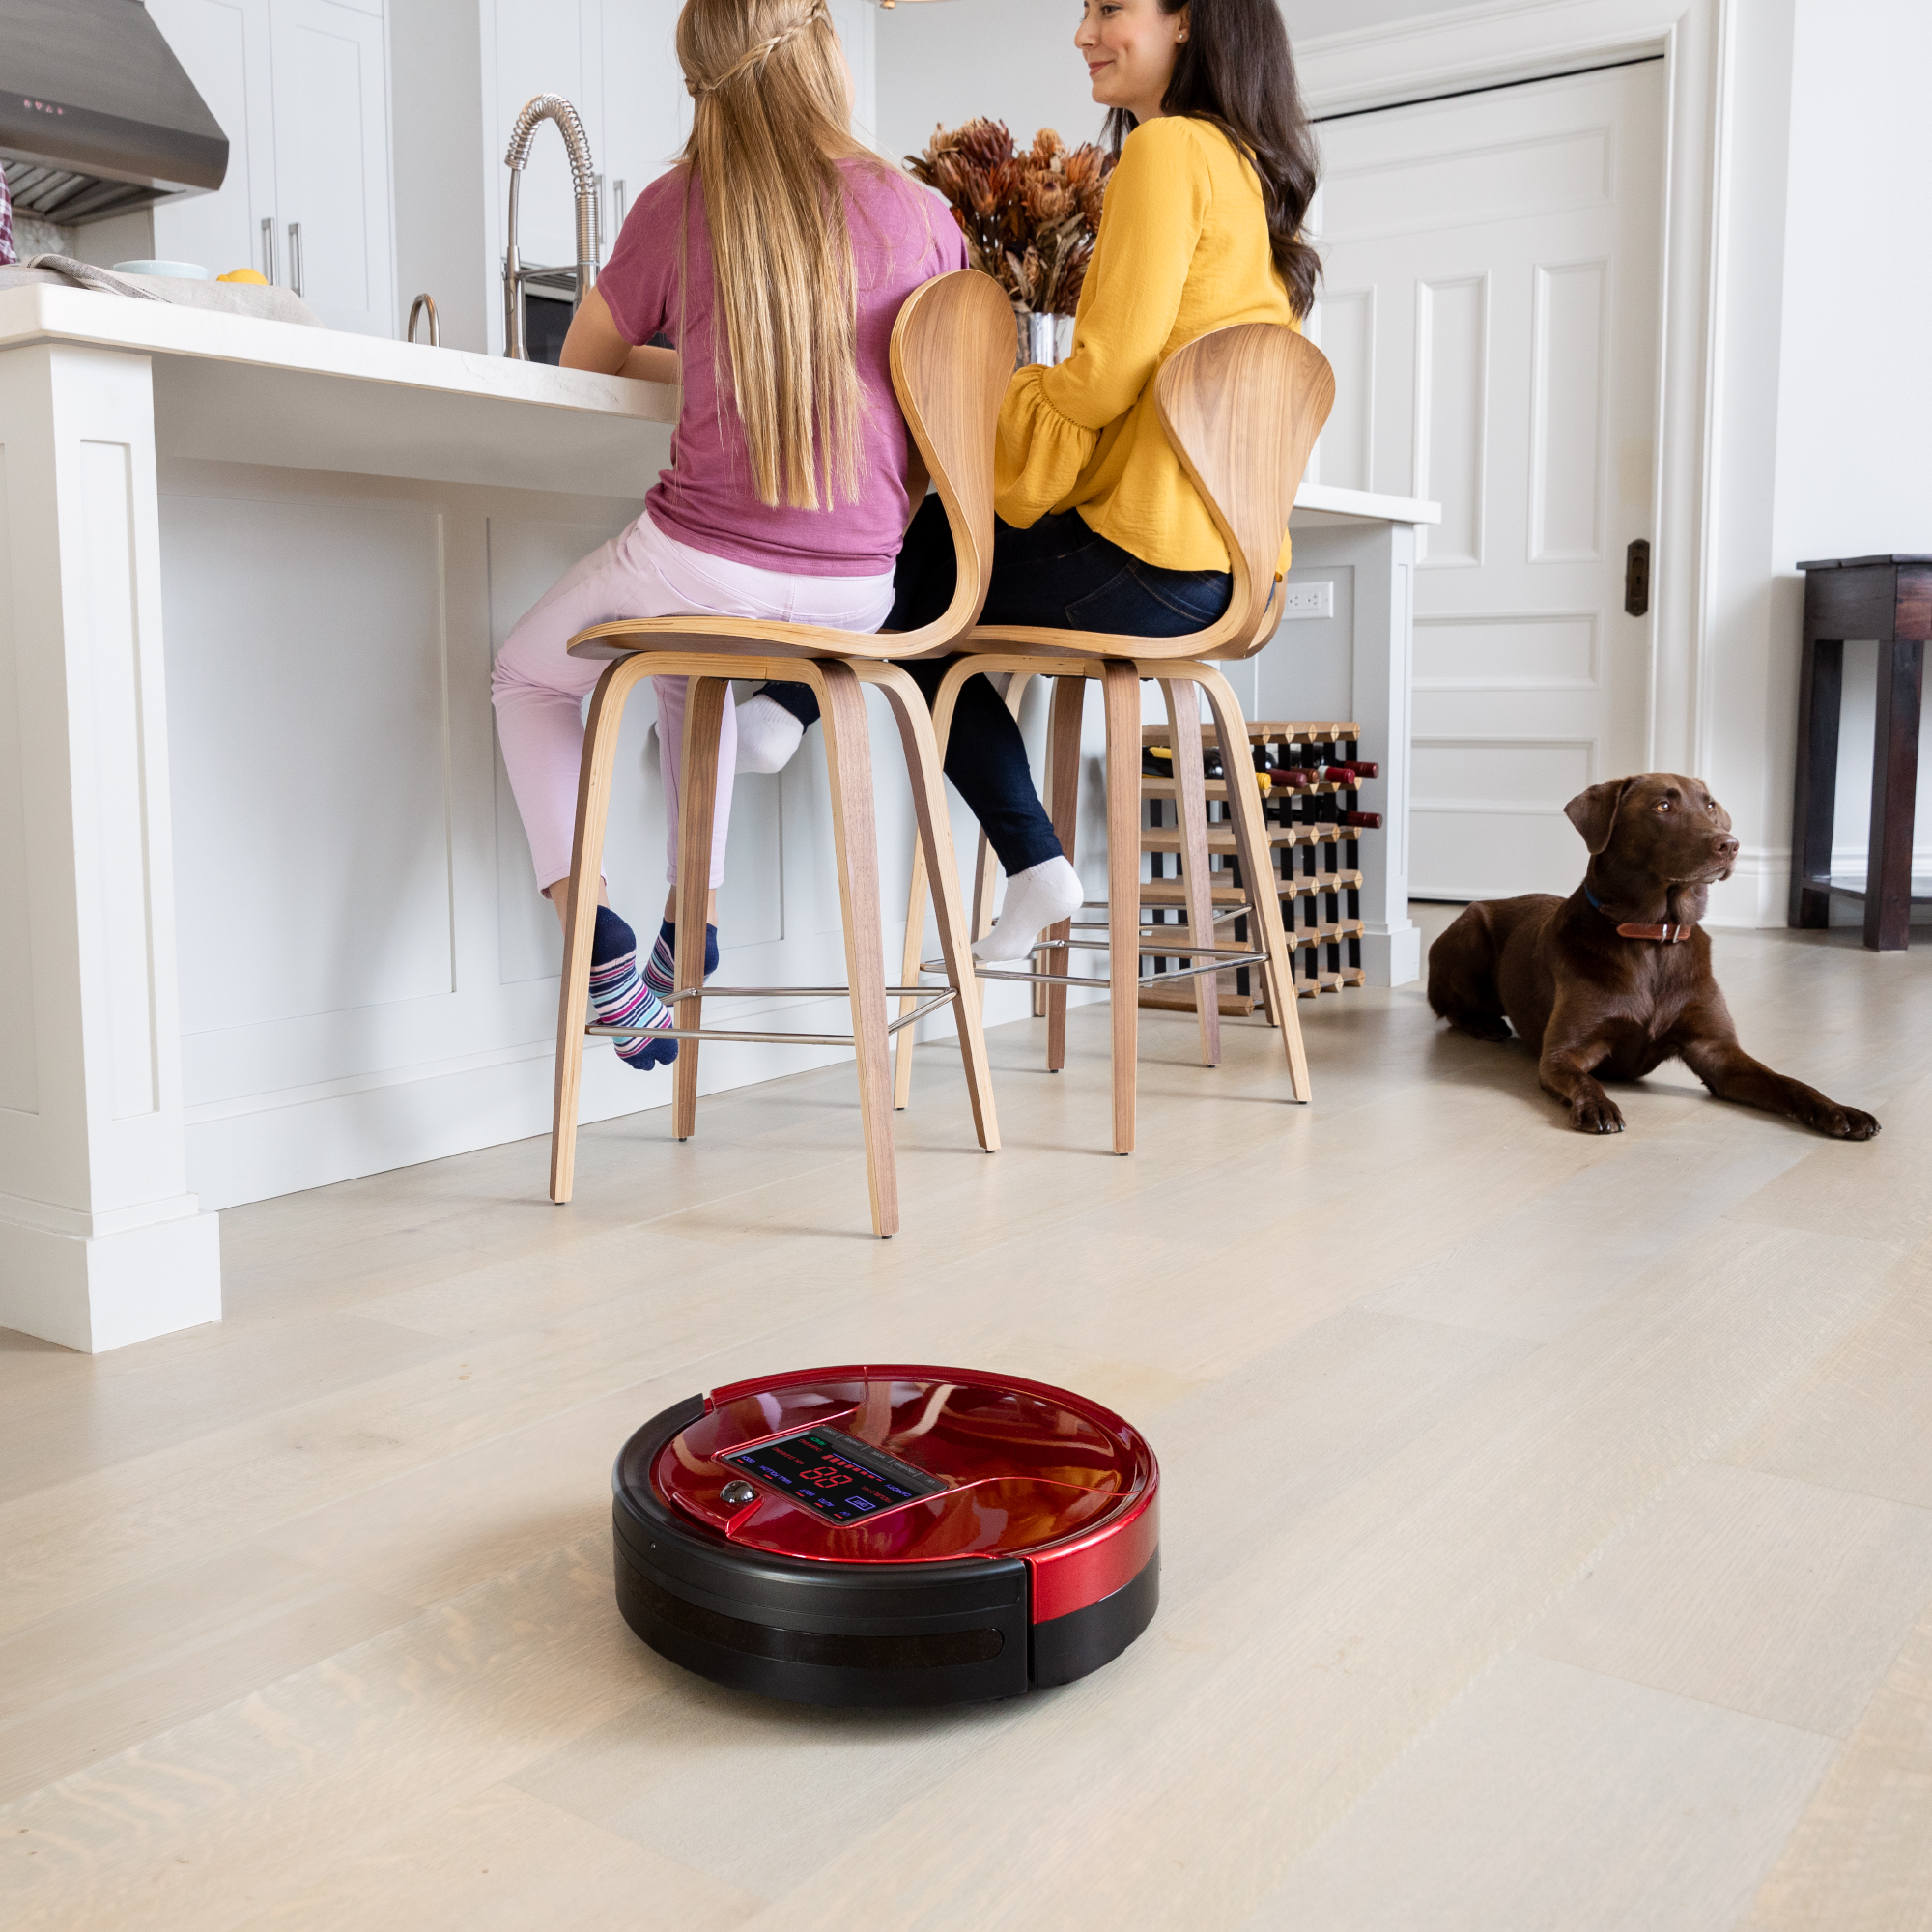 Bobsweep Pet Hair Robotic Vacuum Cleaner and Mop, Rouge - image 5 of 9